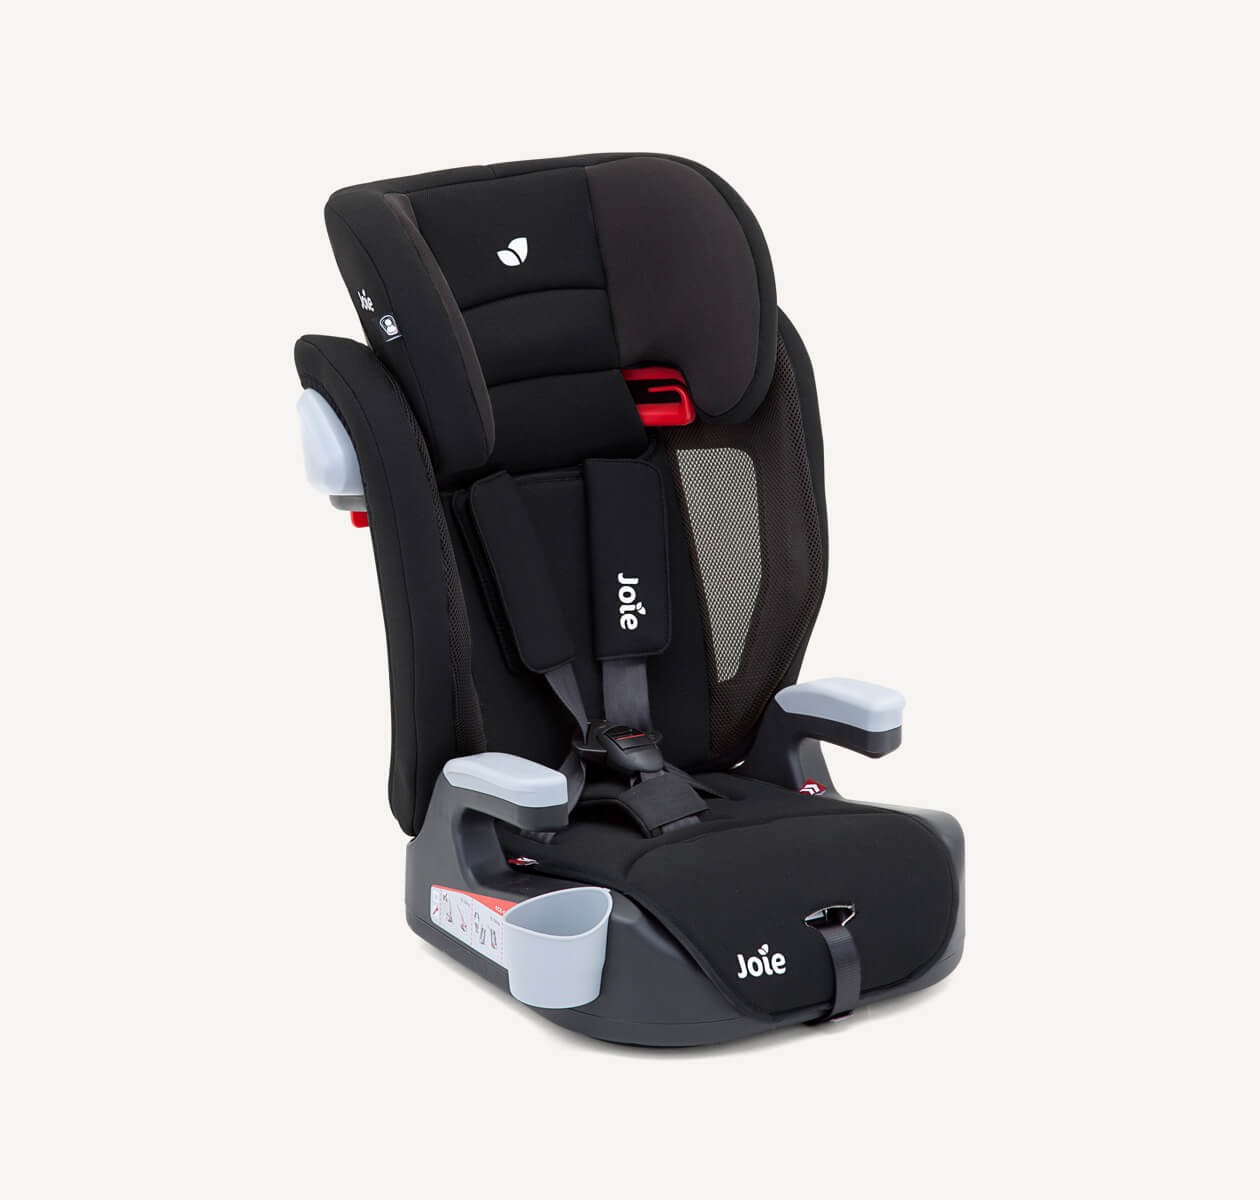 Joie Elevate booster car seat with 5-point harness in a black and red two tone colour, at an angle facing to the right.